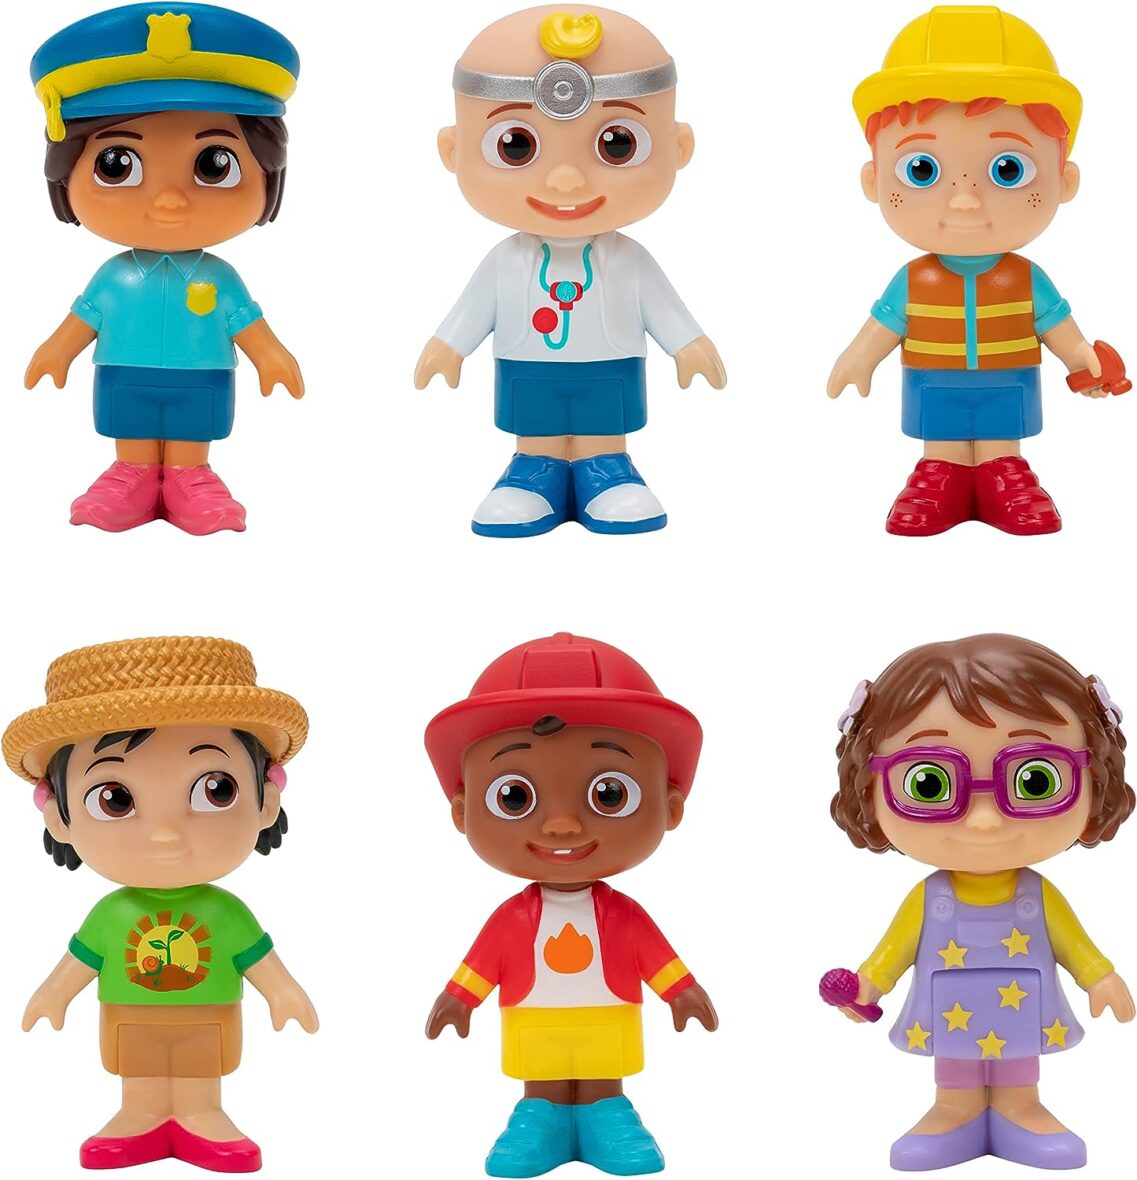 Cocomelon Career Friends 6 Figure Pack – Includes JJ, Nico, Cody, Nina, Bella and CeCe in Career Outfits – Toys for Kids and Preschoolers